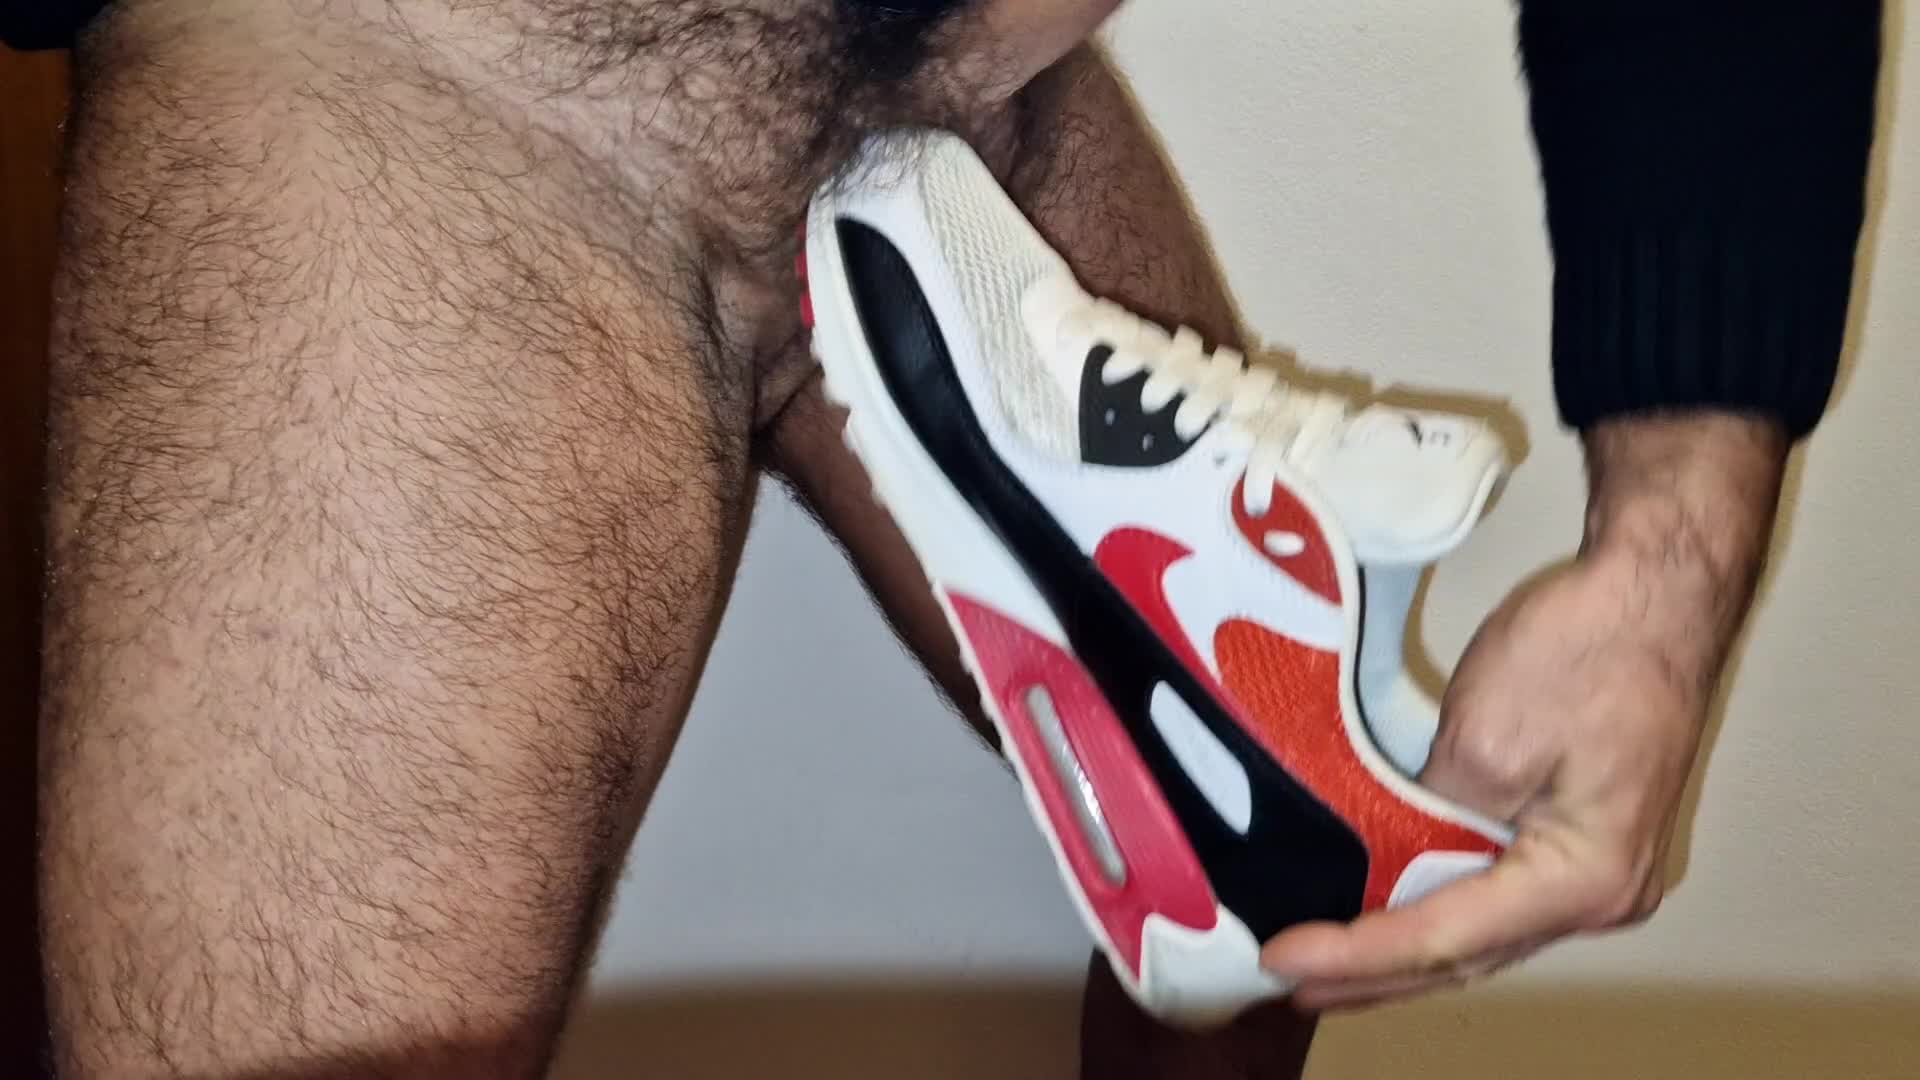 Self kicks to my balls with Nike Air Max 90 sneakers